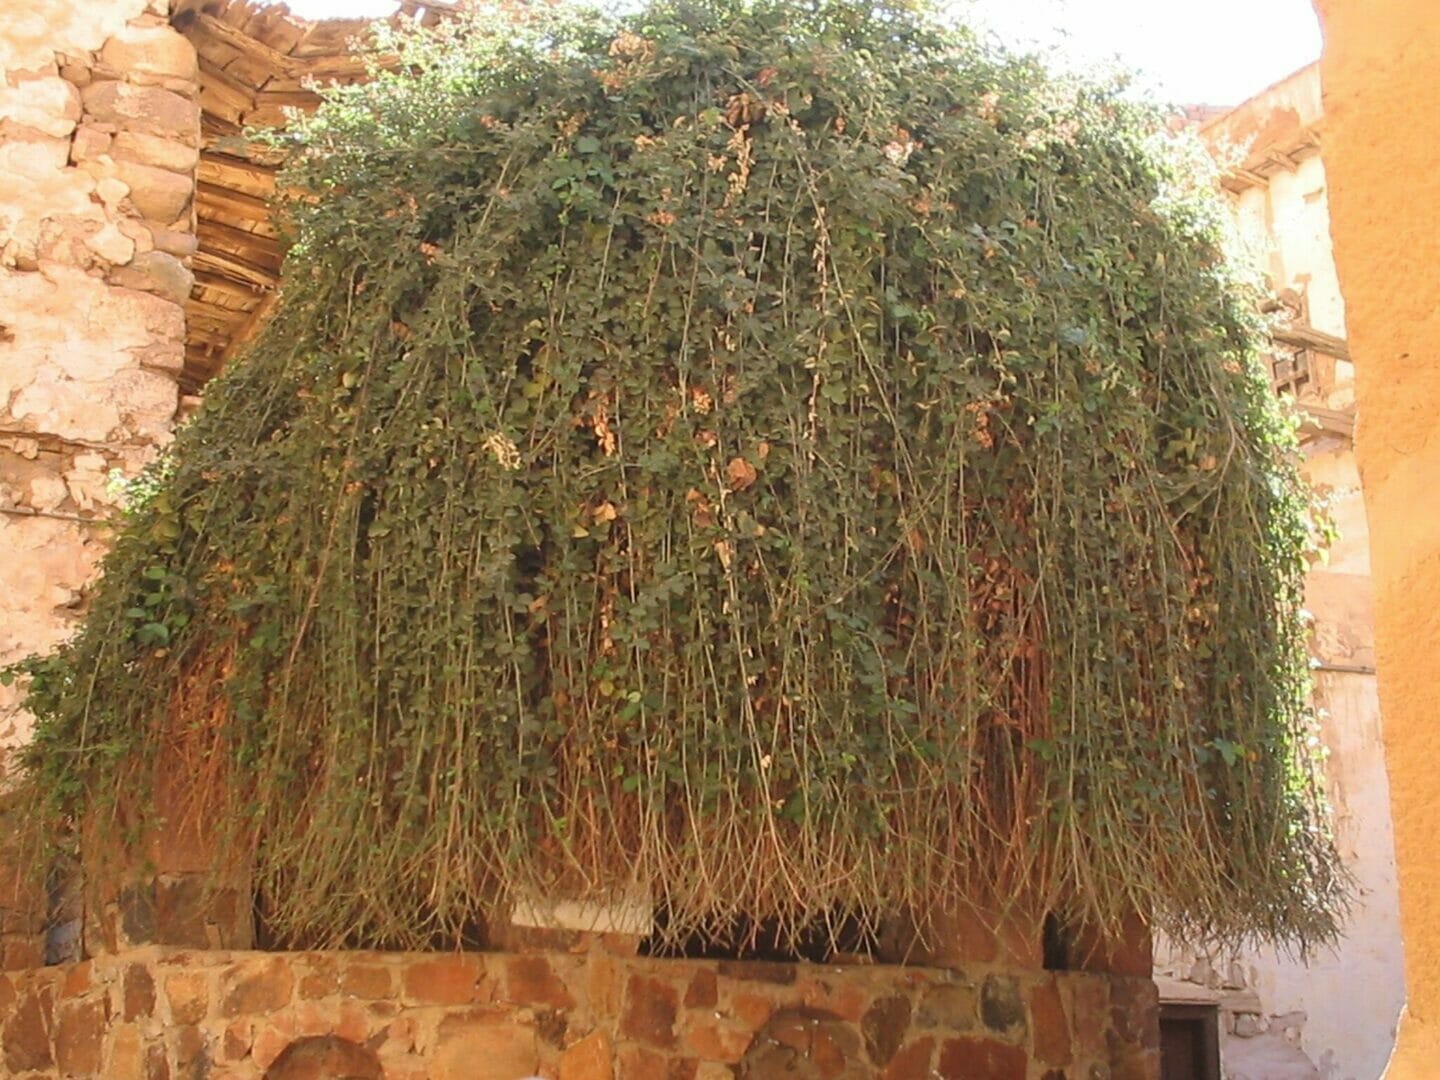 The Burning Bush of Moses in Egypt